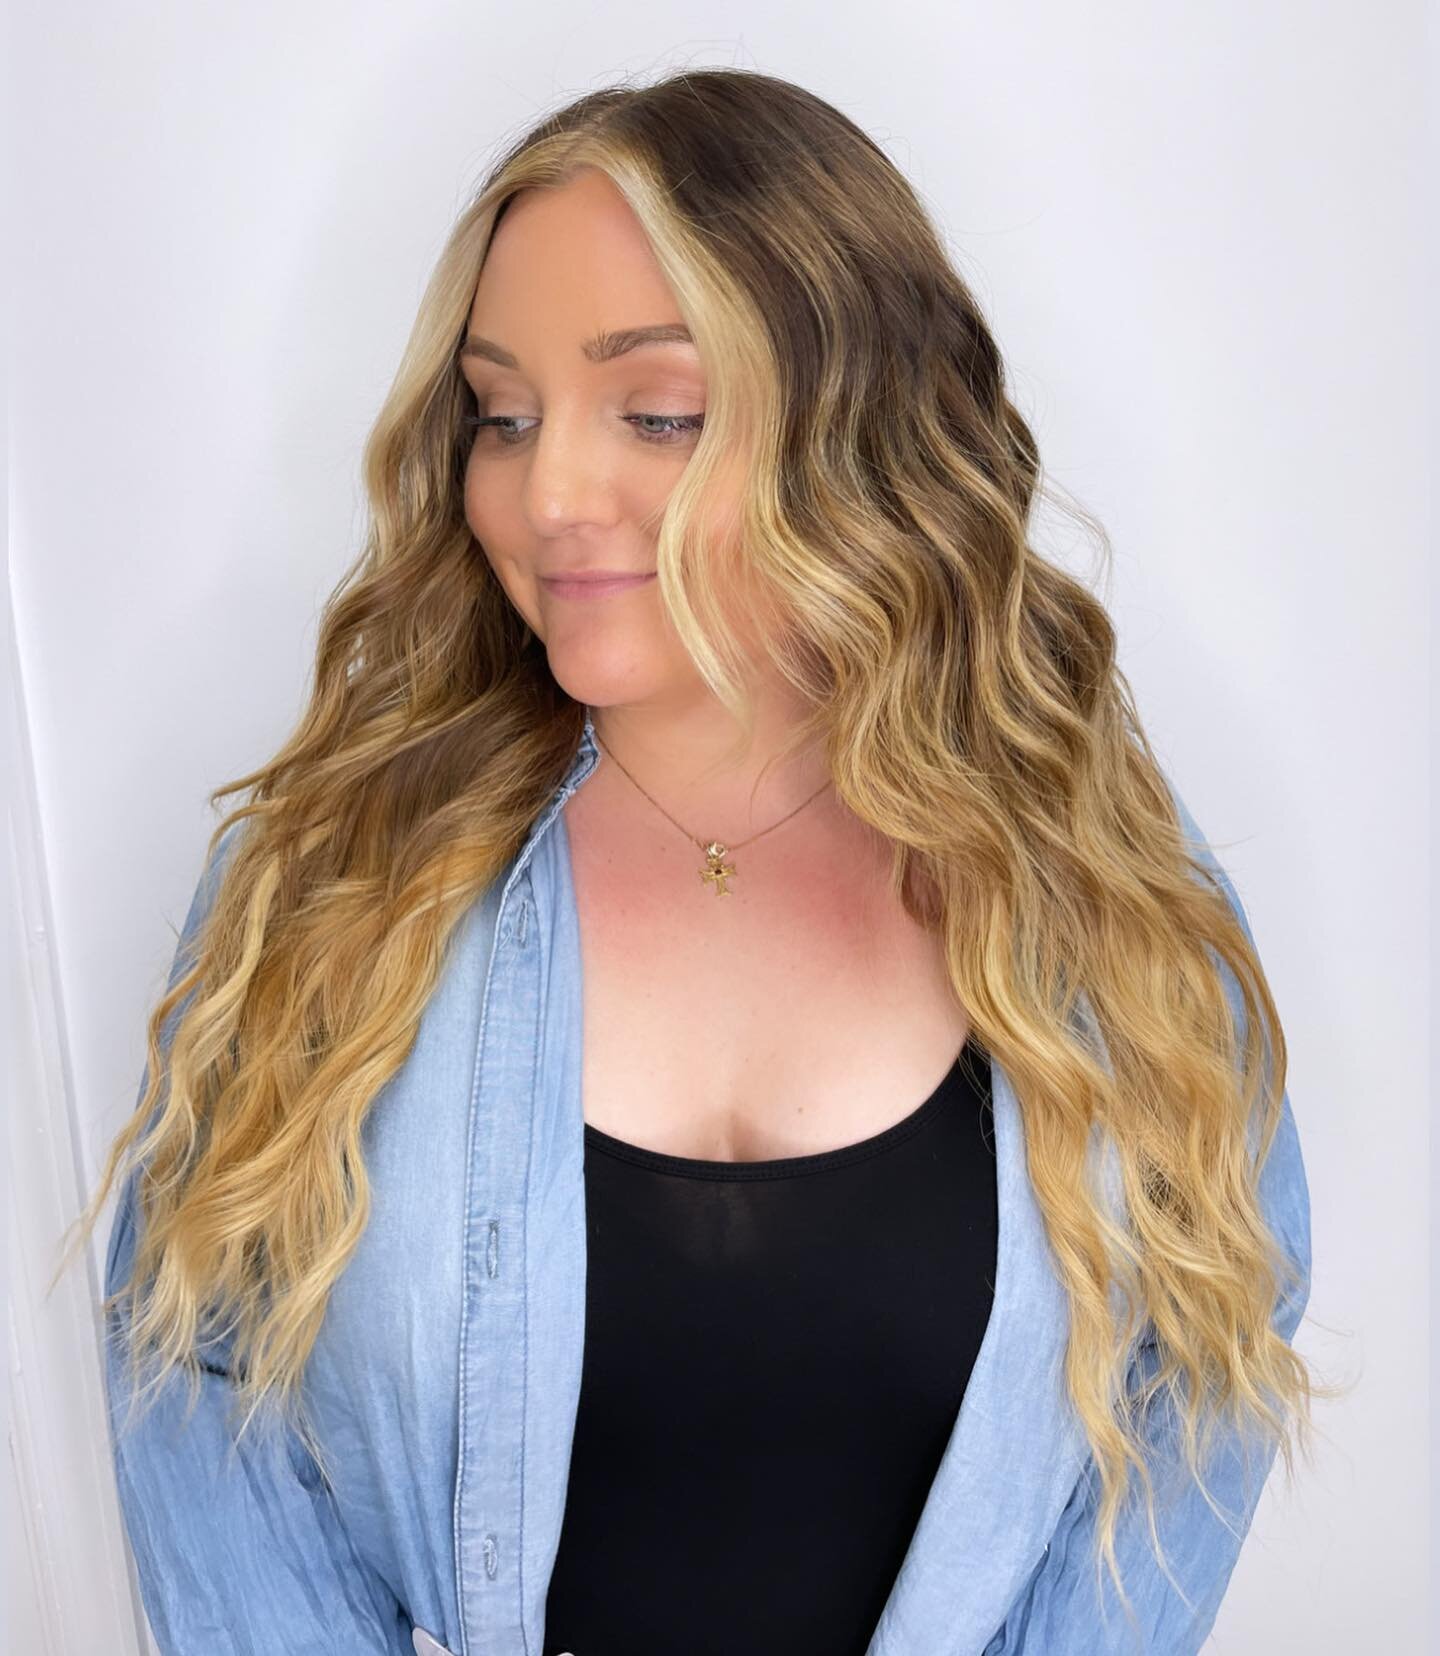 Hair for days 😍 
Full head of 22&rdquo; tape-in hair extensions 
✨C O N T A C T✨
Link in Bio to book
For inquiries &amp; all other info contact 
💌Beautycafenj@gmail.com
.
.
.
.
.
.
#hair #hairextentions #tapeins #wedding #bride #bridal #monmouthcou